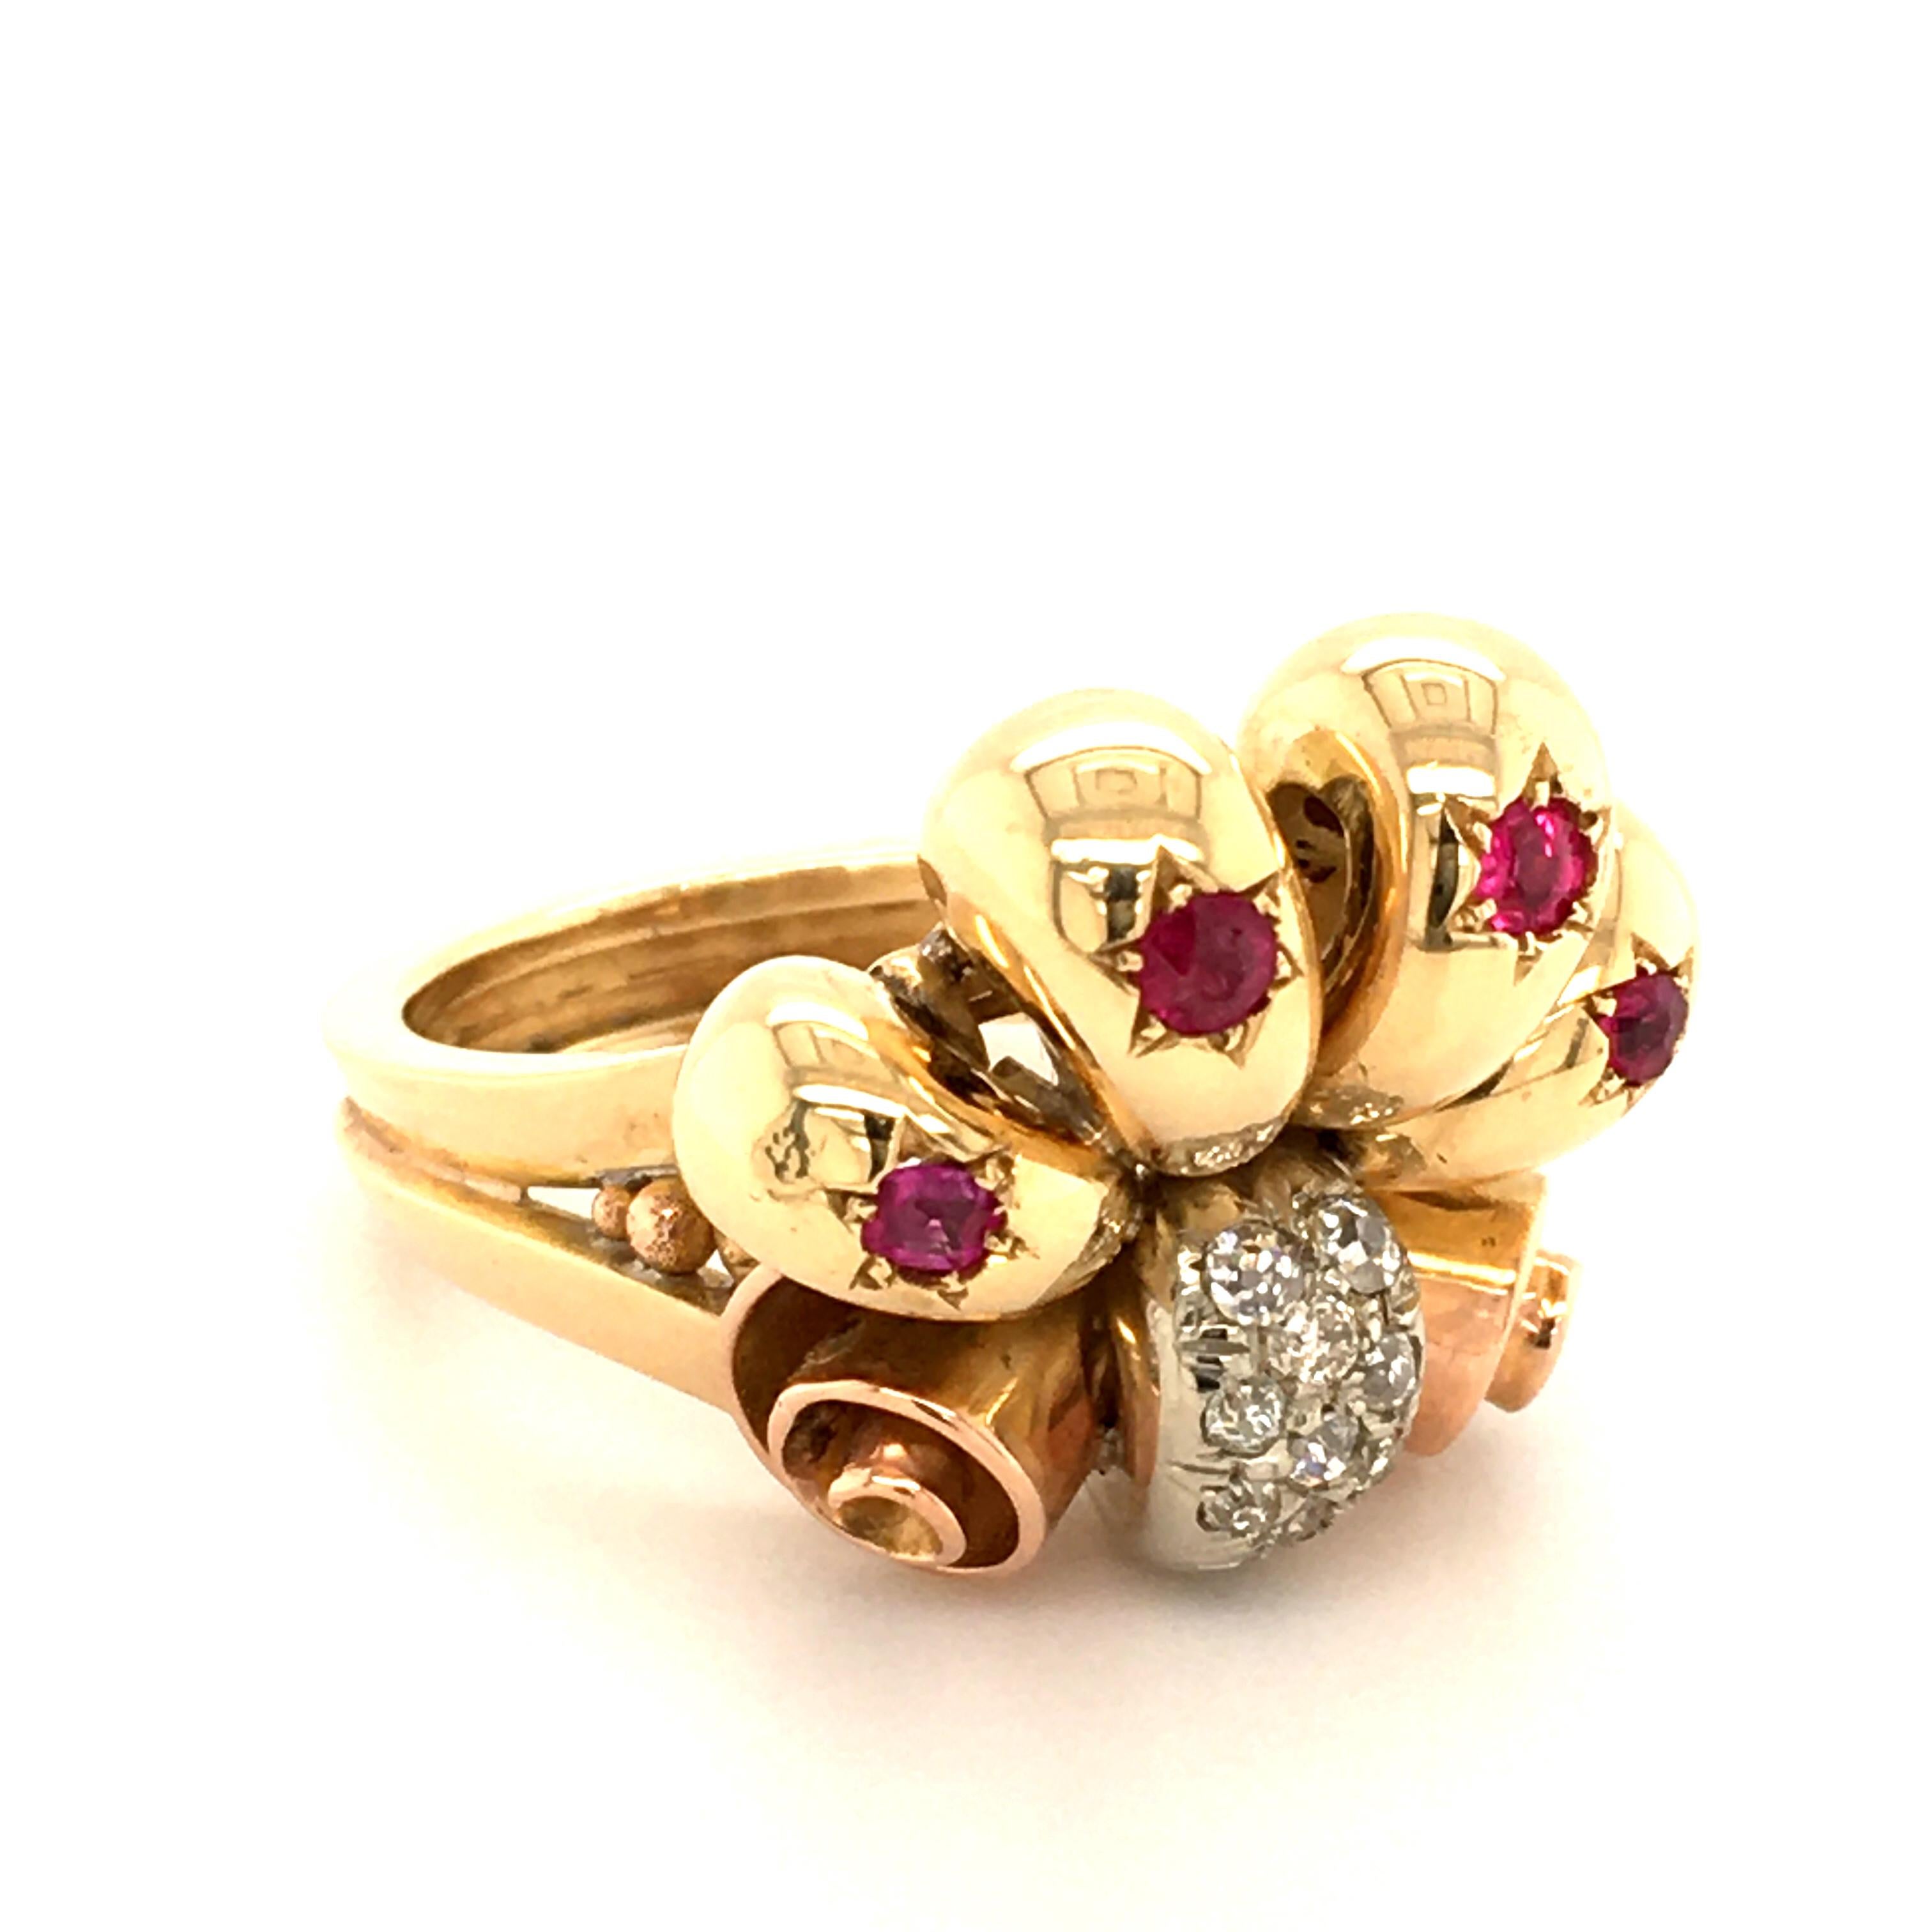 With this out of the ordinary Cocktail Ring you will be the Highlight of every Party.
The Baroque Elements are made of 18 kt Yellow-, Red-, and White Gold.
The White Gold part is set with beautiful Oldcut Diamonds 
The glowing rubies are set in a